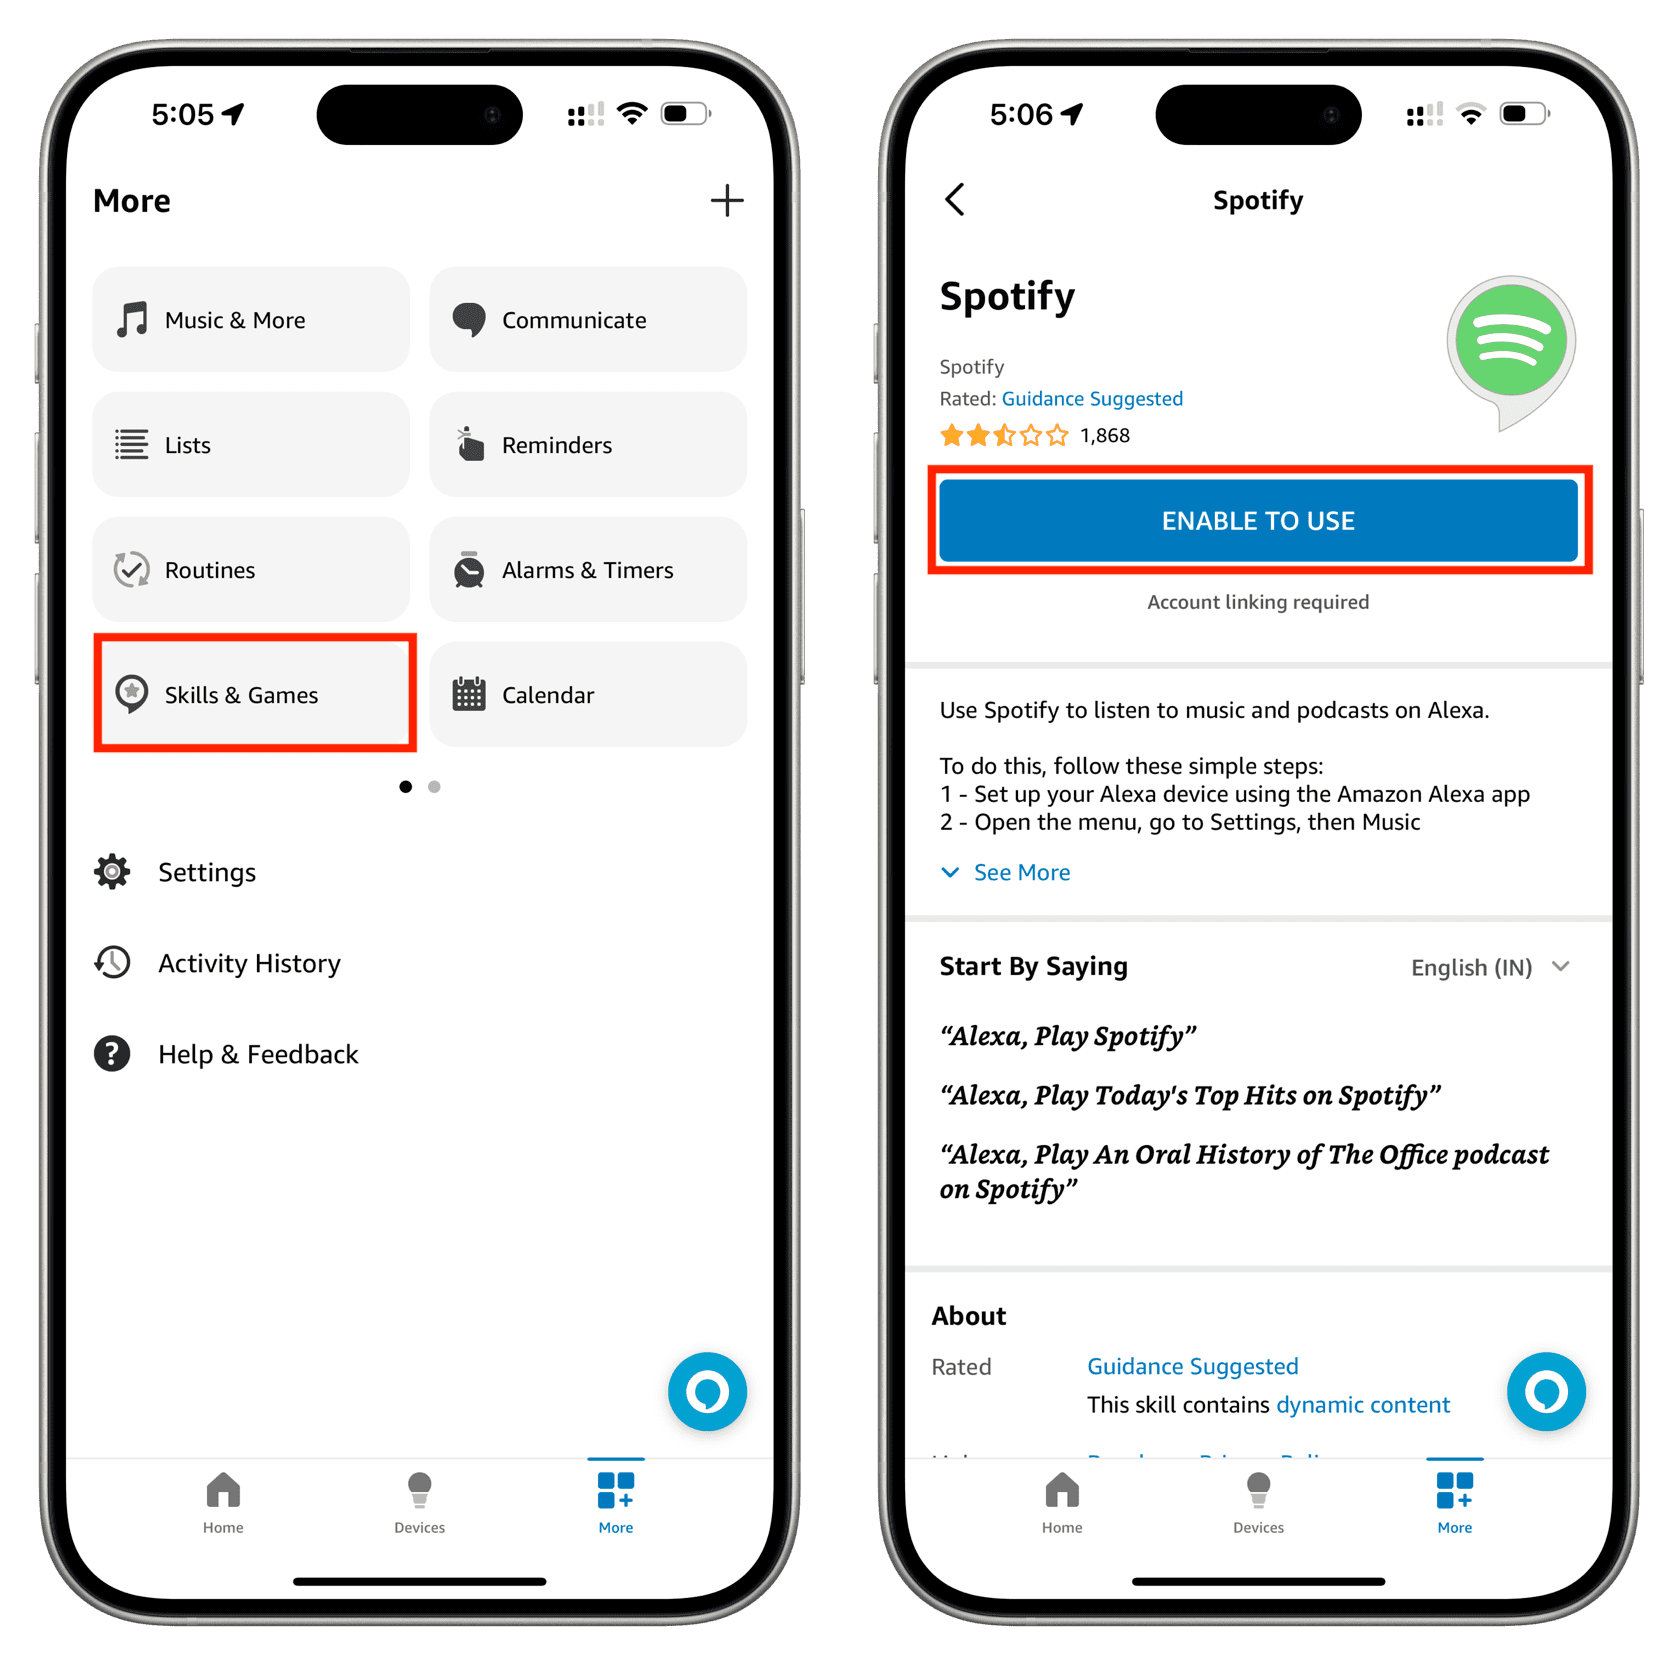 Go to Alexa Skills and Games and enable Spotify